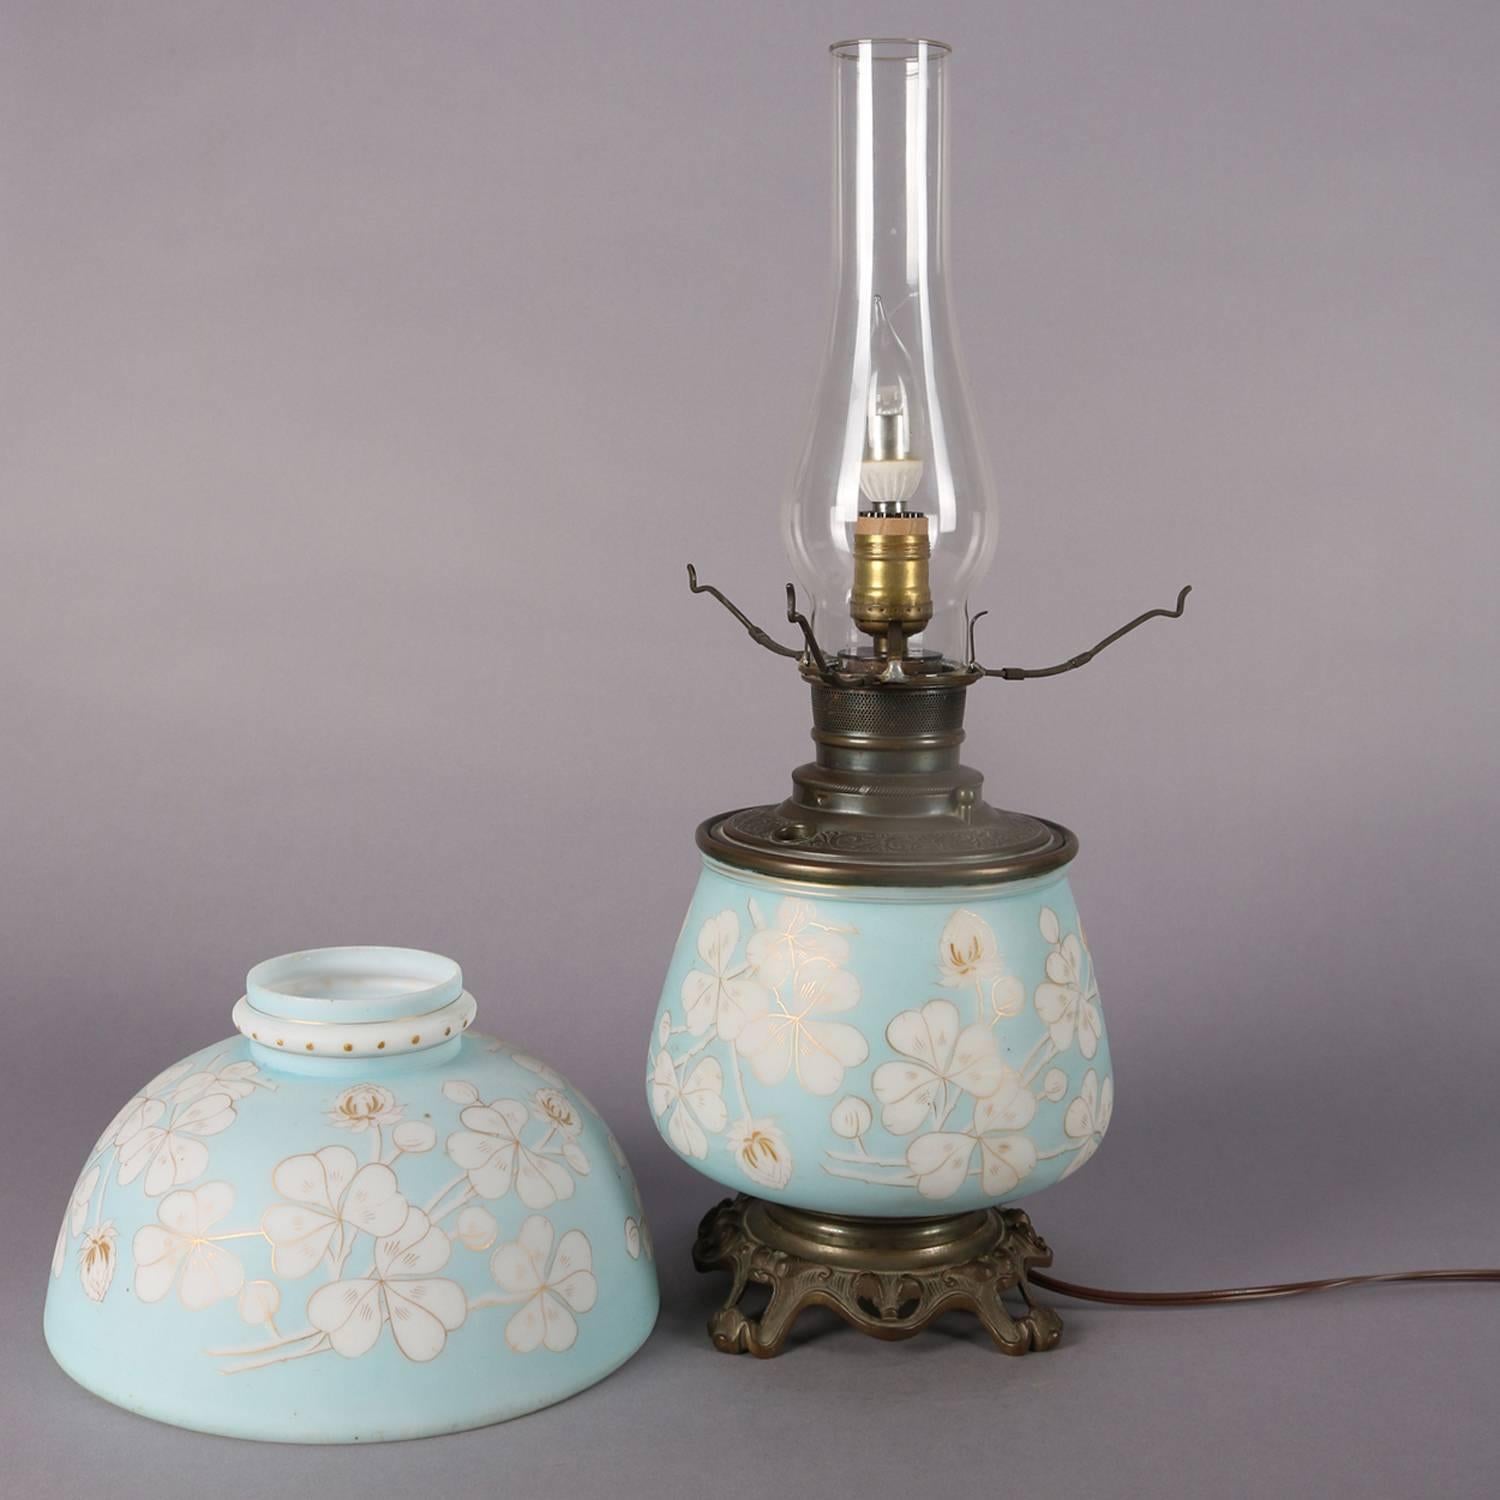 An antique Gone-with-the-Wind electrified oil lamp features blue satin glass base and shade with gilt decorated clover, circa 1890

***DELIVERY NOTICE – Due to COVID-19 we are employing NO-CONTACT PRACTICES in the transfer of purchased items. 